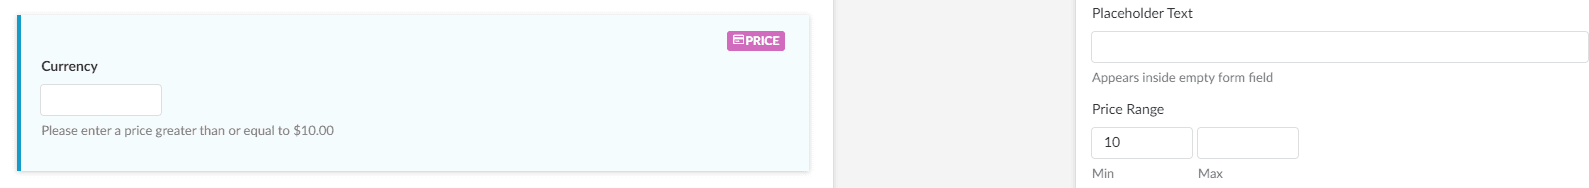 currencyfieldpricing.png